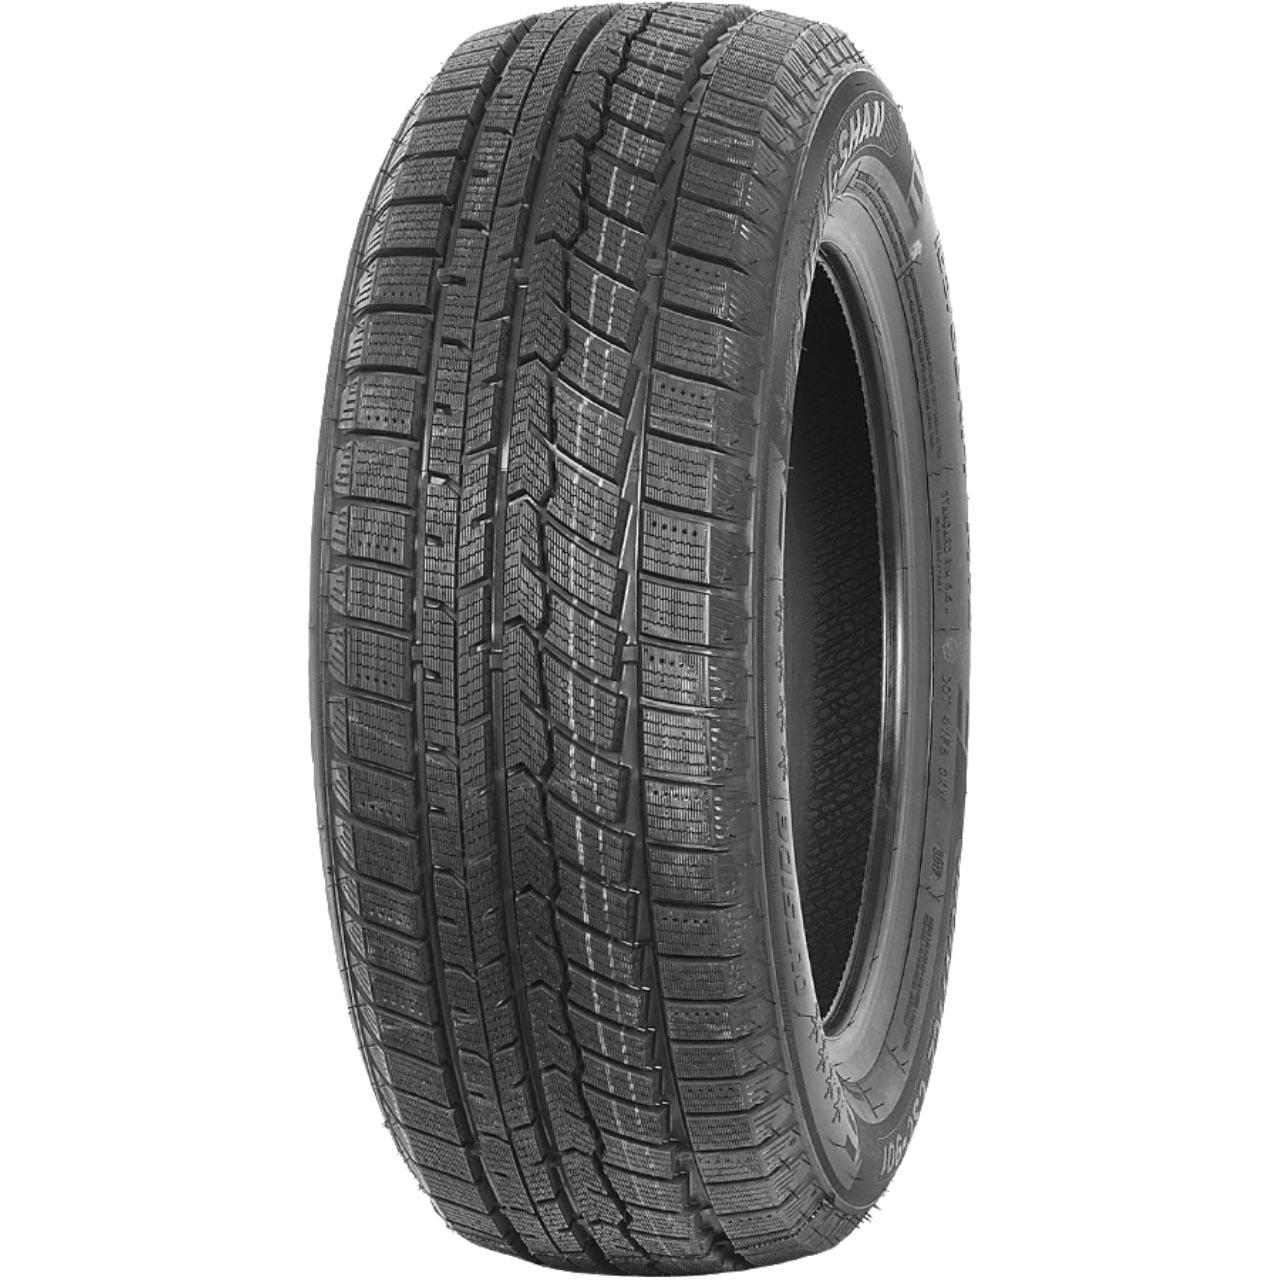 CHENGSHAN MONTICE CSC-901 225/60R17 99H BSW